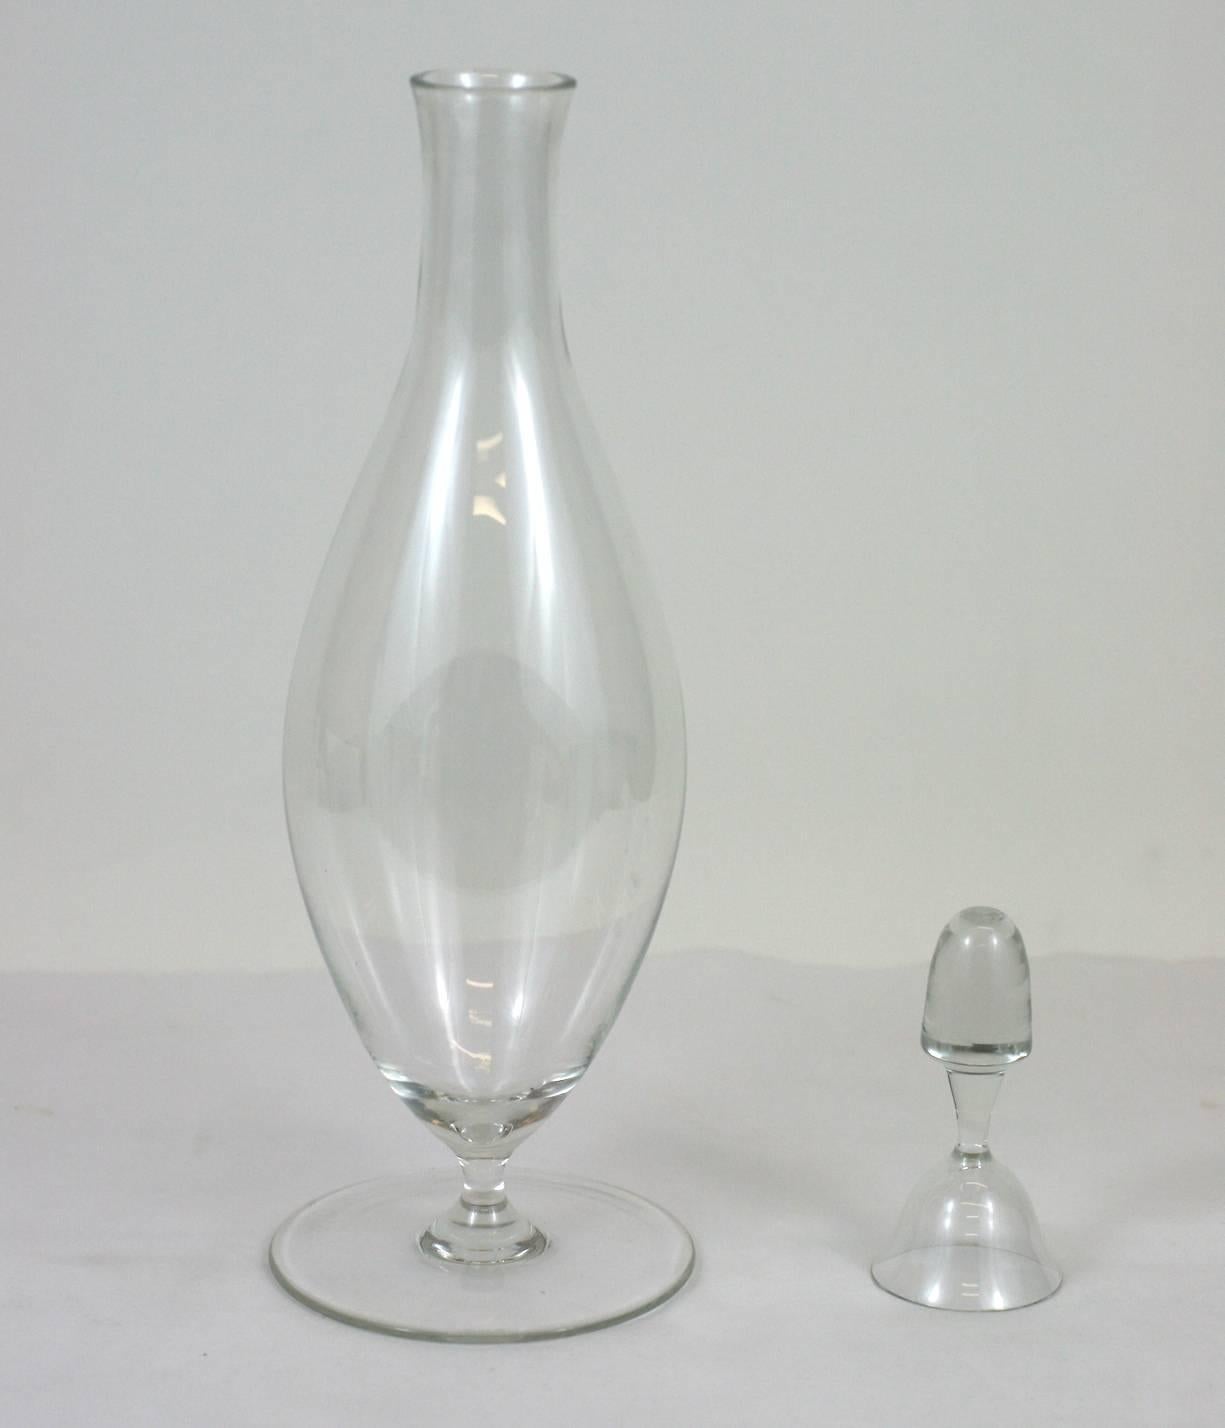 Joseff Hoffmann iconic decanter with drinking glass stopper for the Weiner Werkstatte. From the Patrician series by Lobmeyr. 1920's Austria. 10